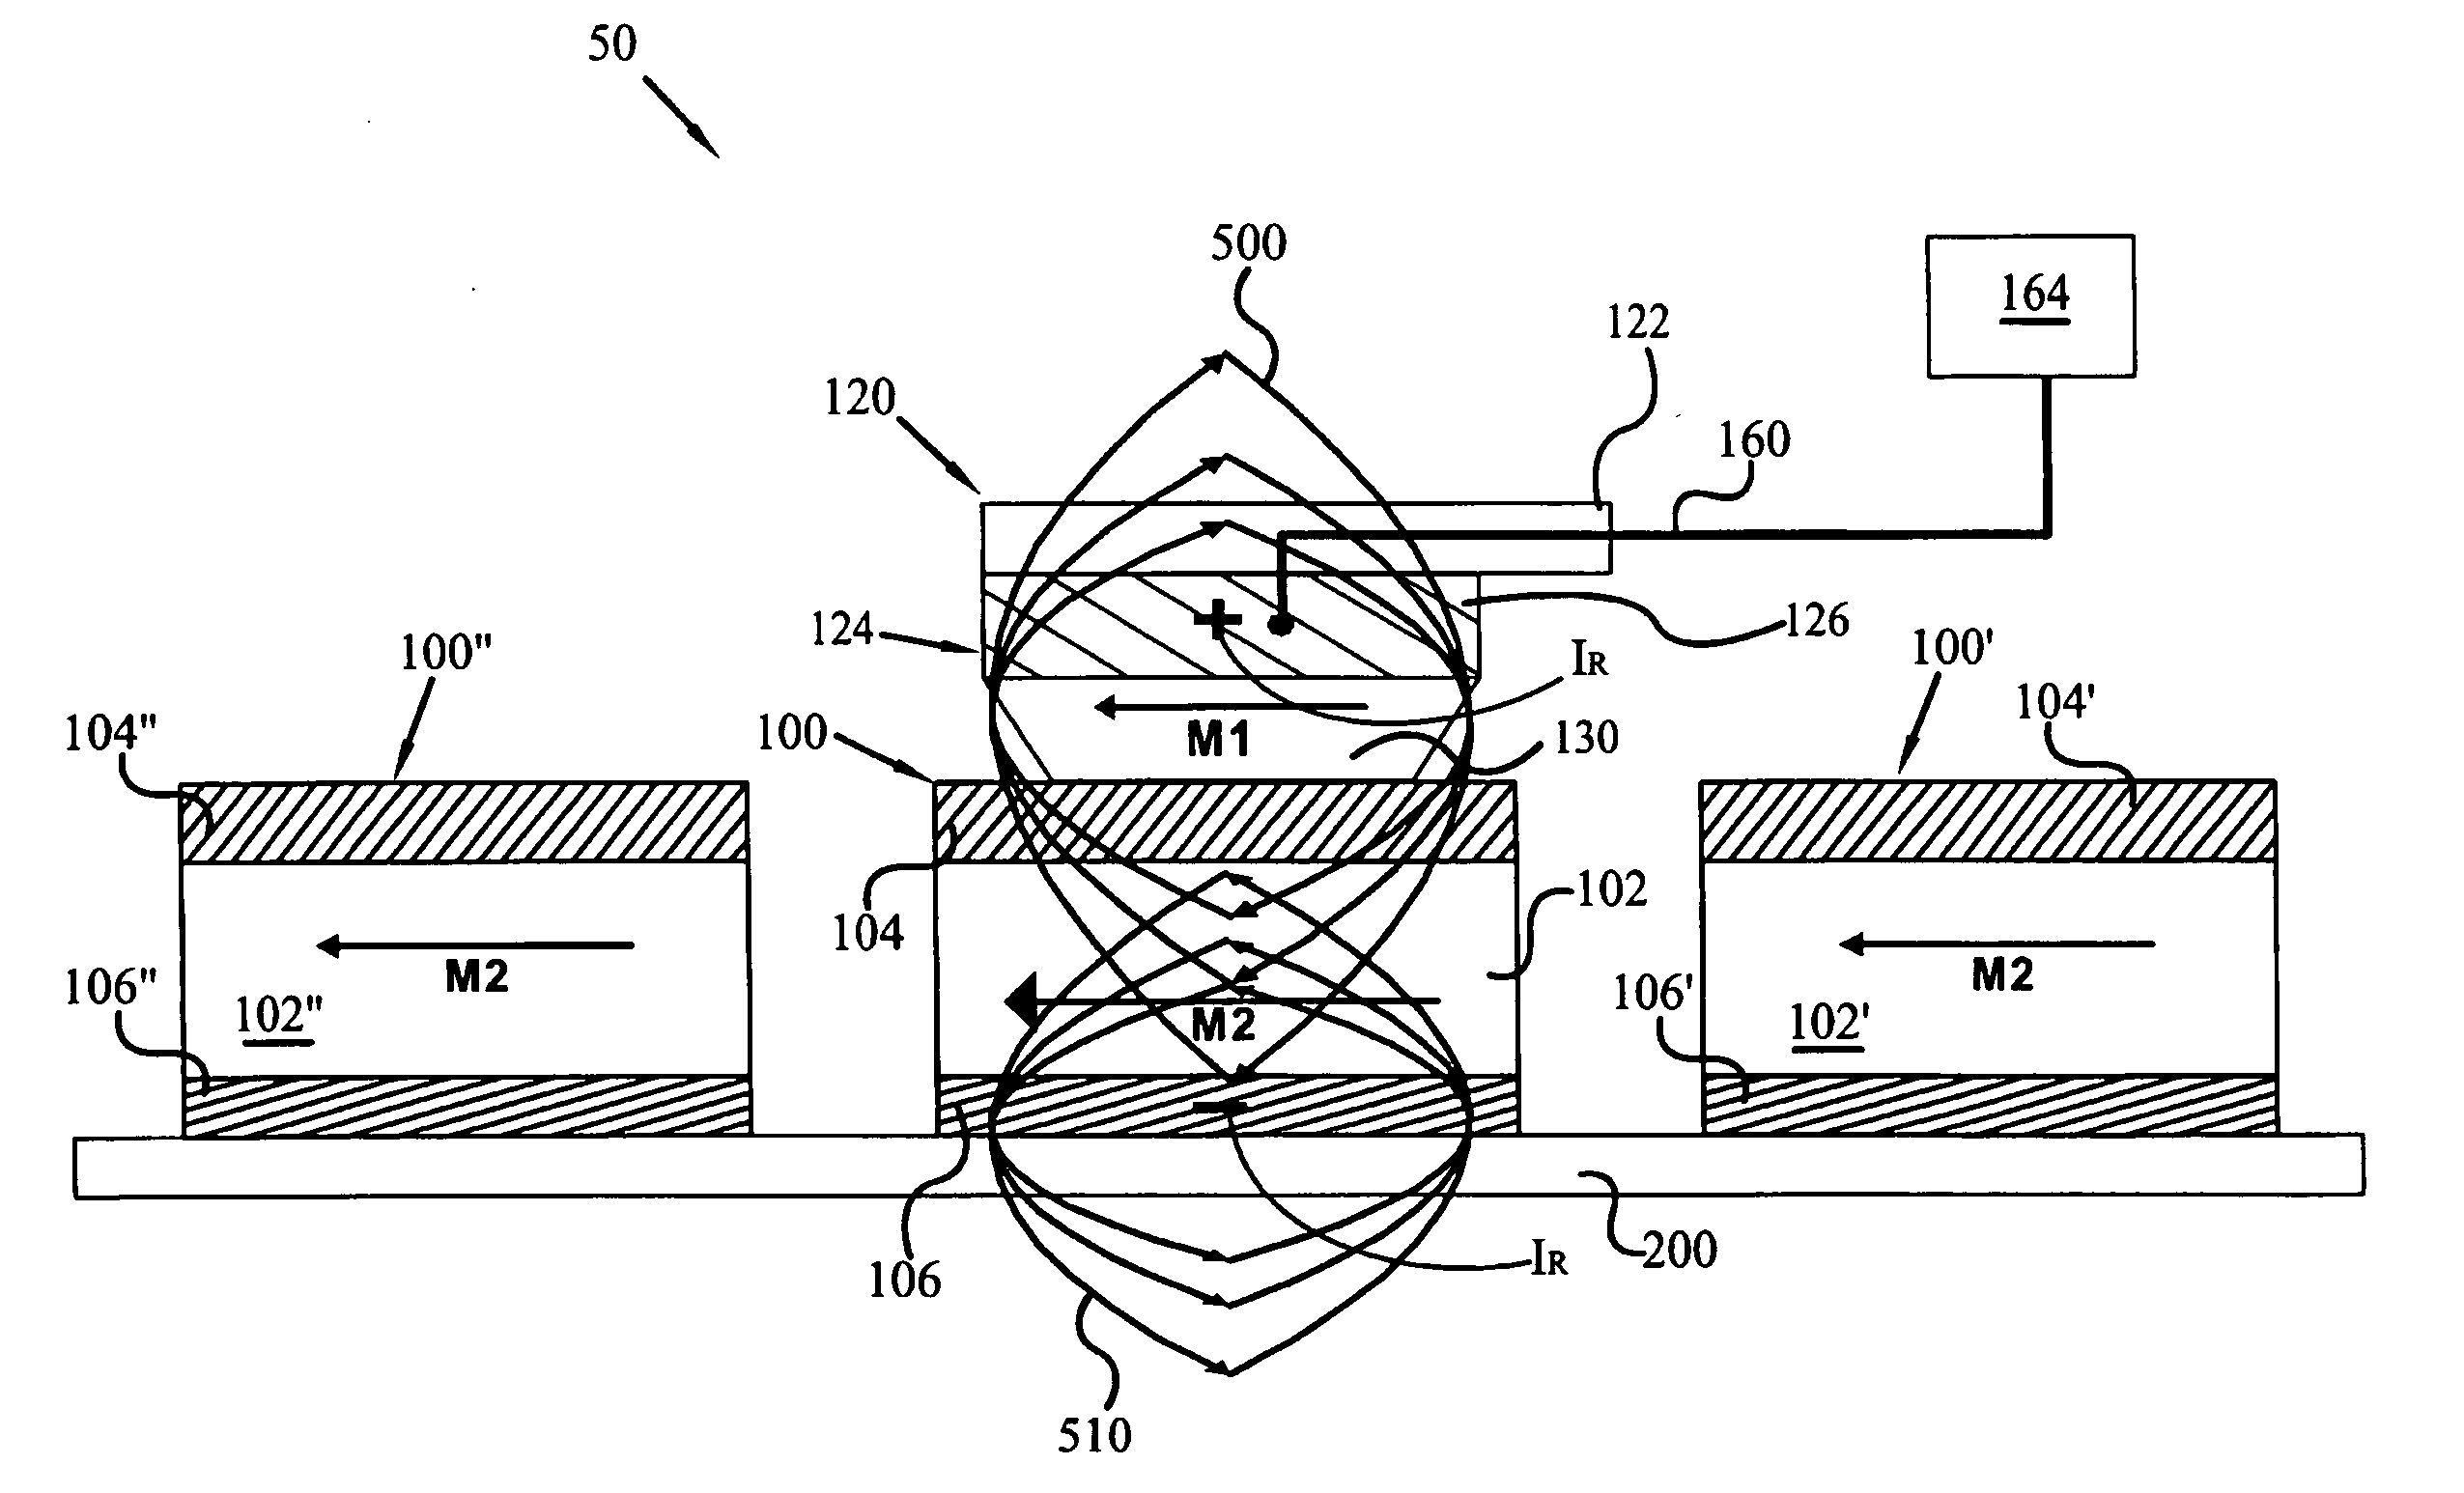 Magnetic memory storage device